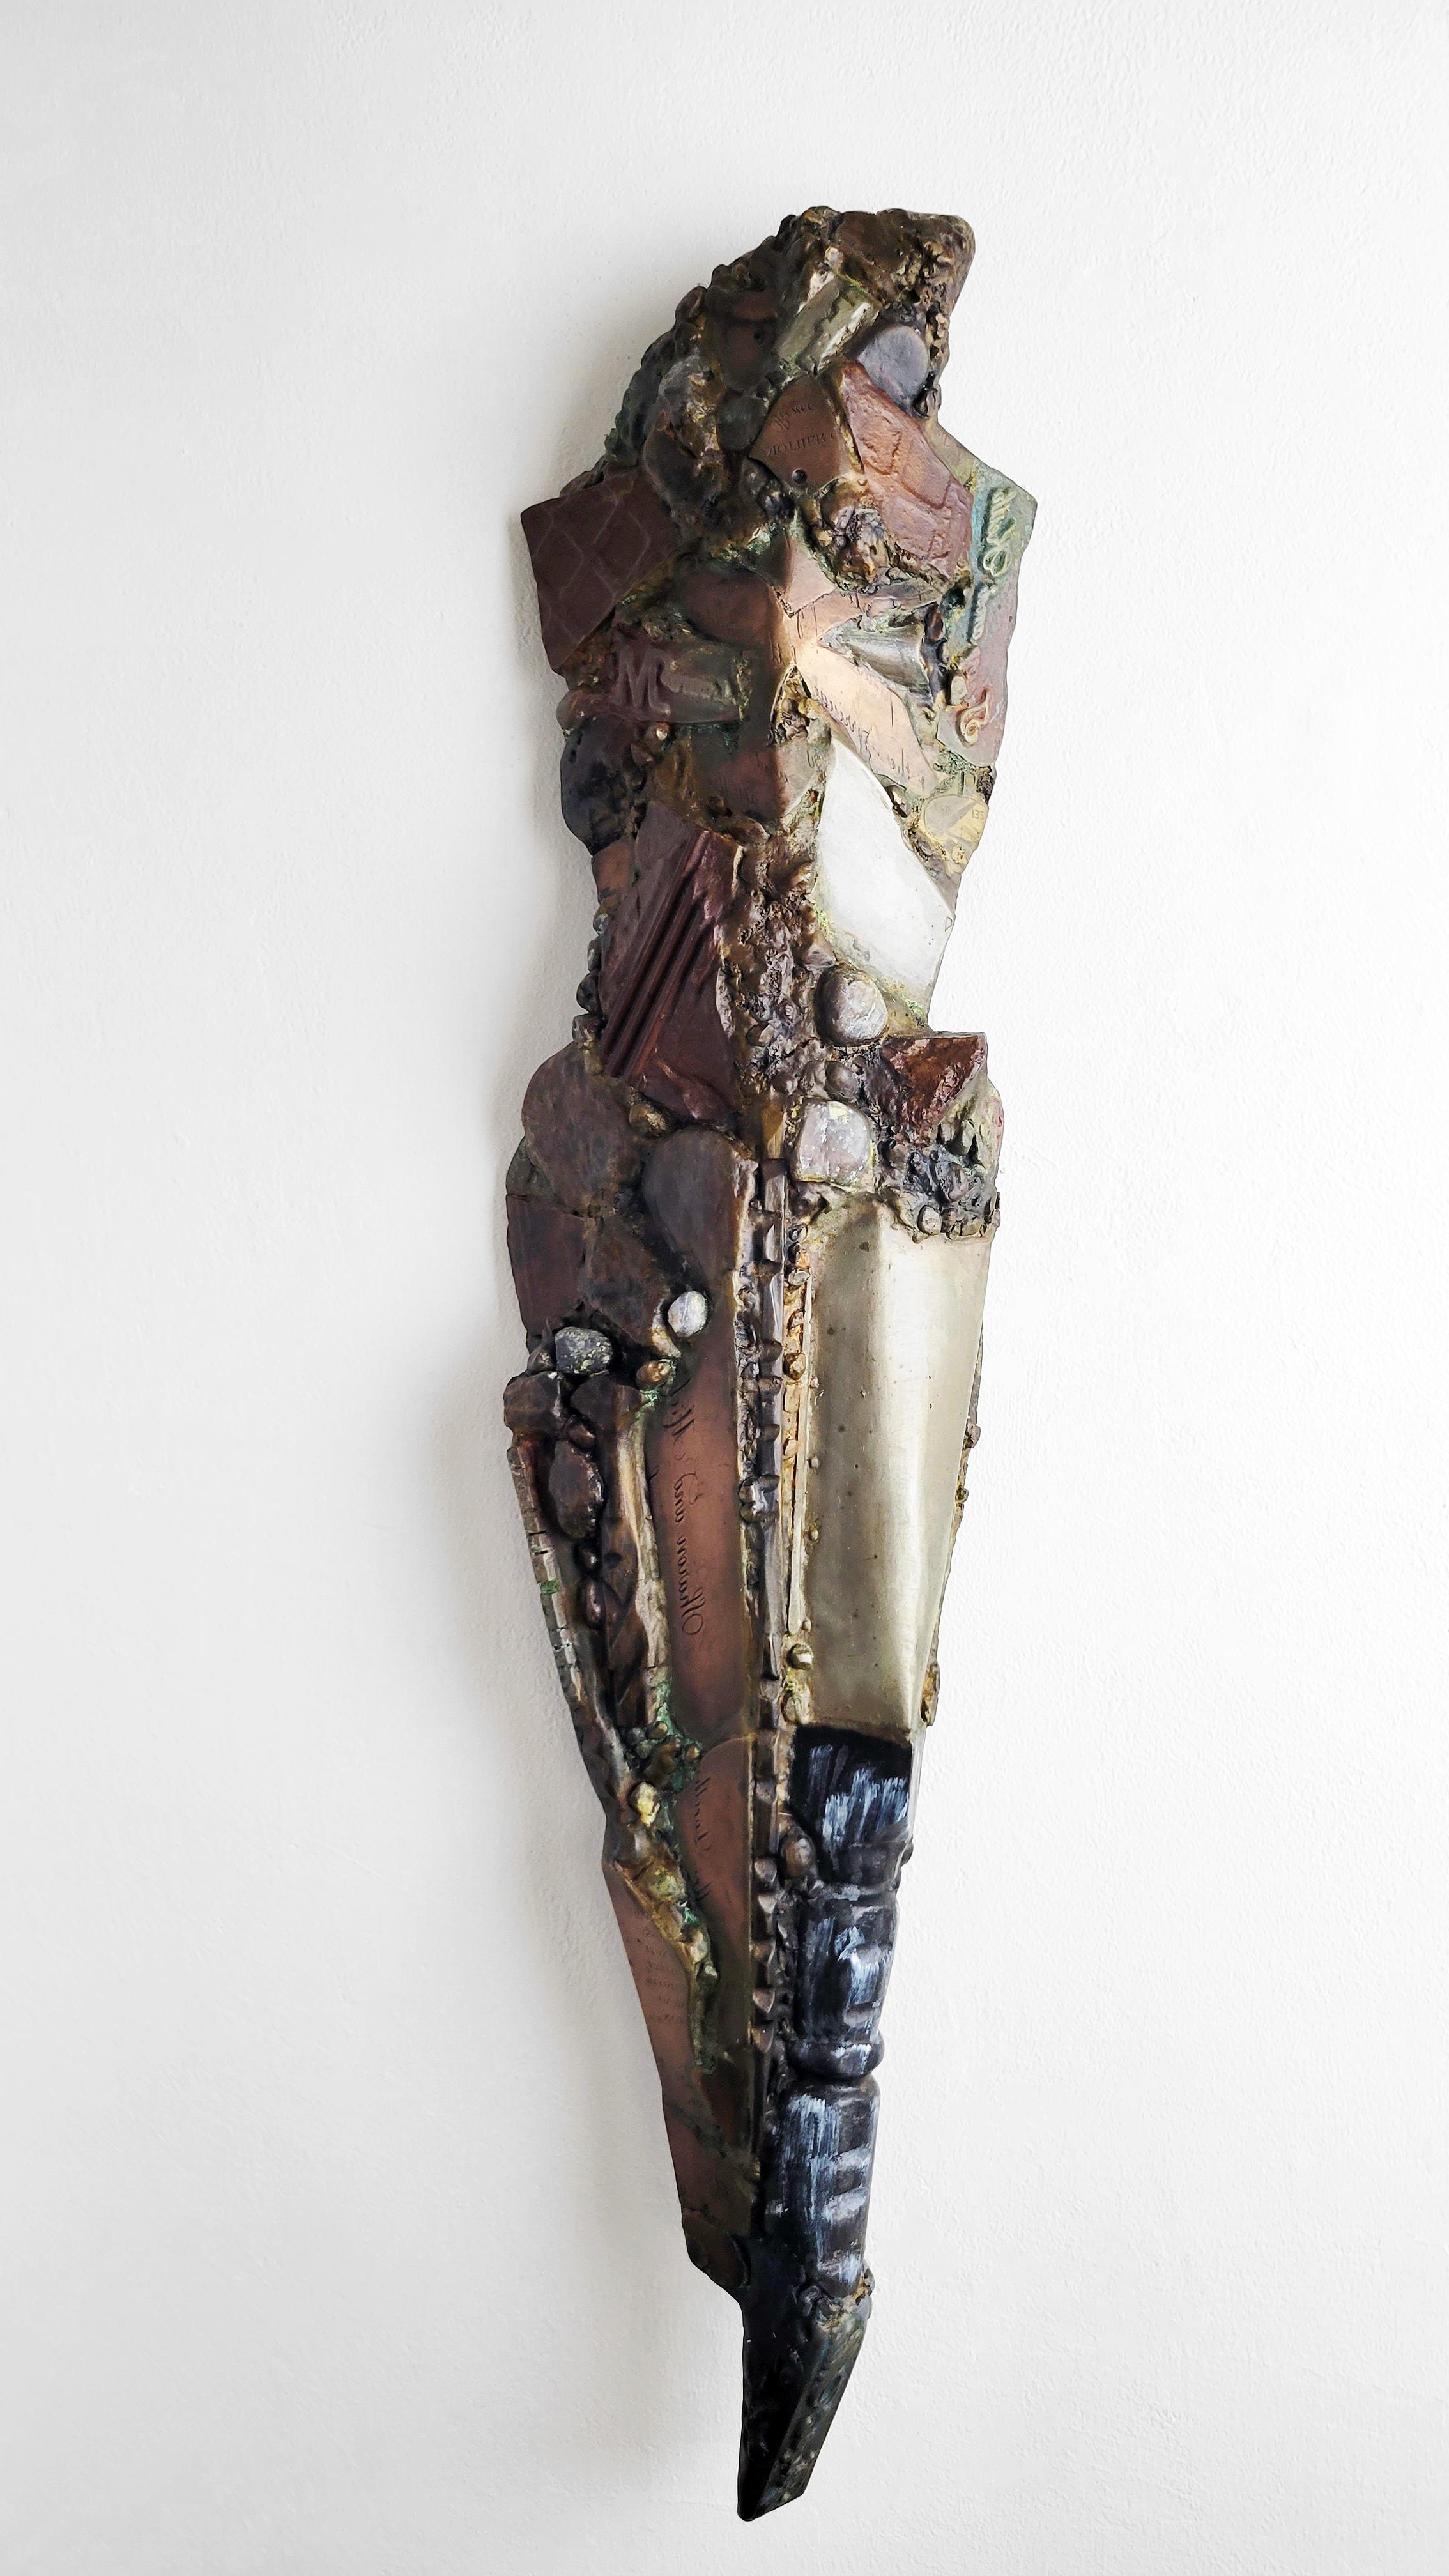 Knight Emerged 583 is from Linda Stein’s Knights of Protection series, which she started after being forced to evacuate her New York downtown studio for a year post-9/11.  Stein's Knights are shield-like forms made of mixed media that hang on the